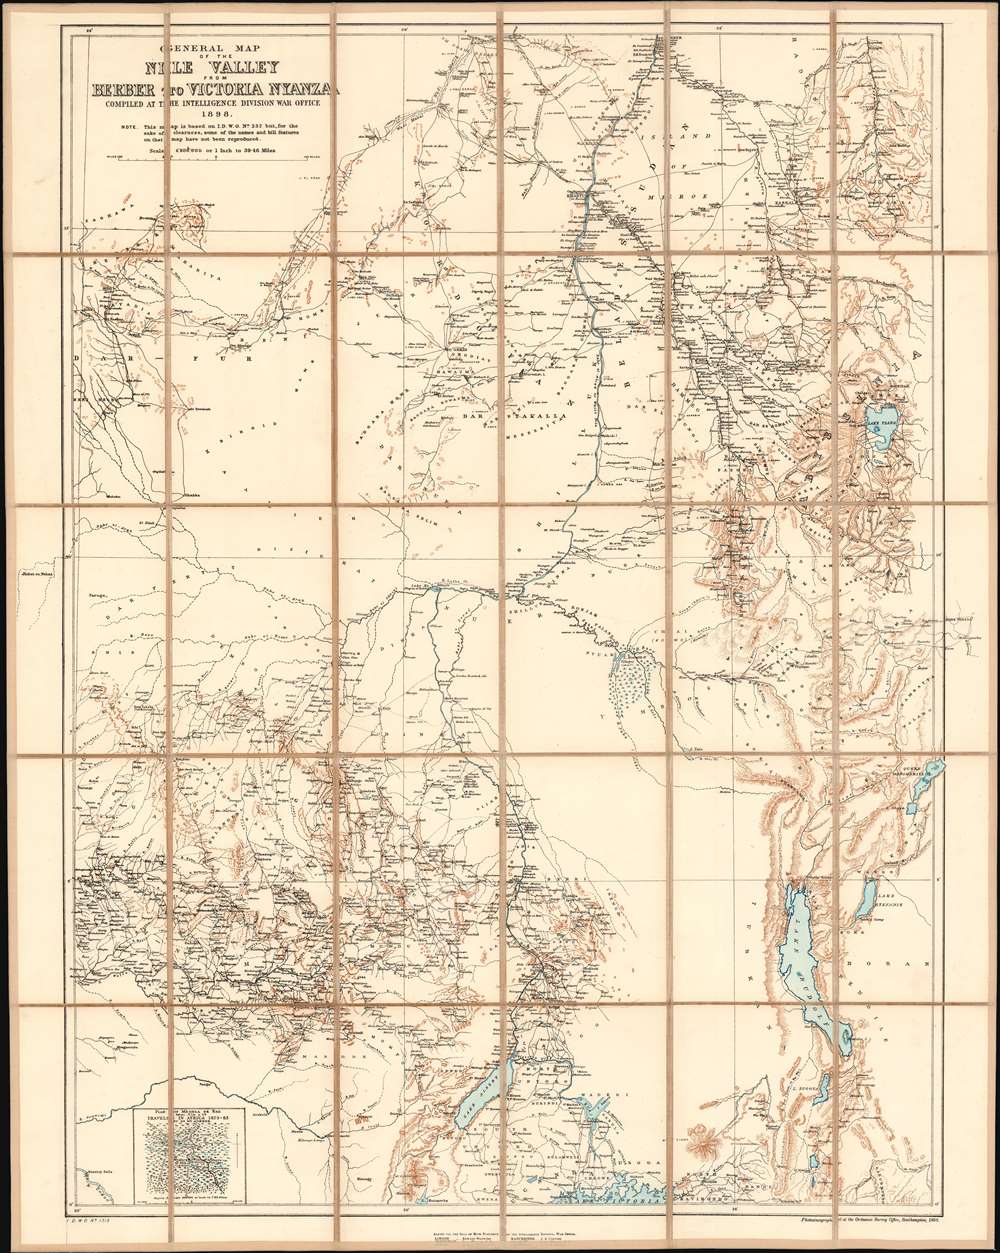 General Map of the Nile Valley from Berber to Victoria Nyanza Compiled at the Intelligence Division War Office 1898. - Main View